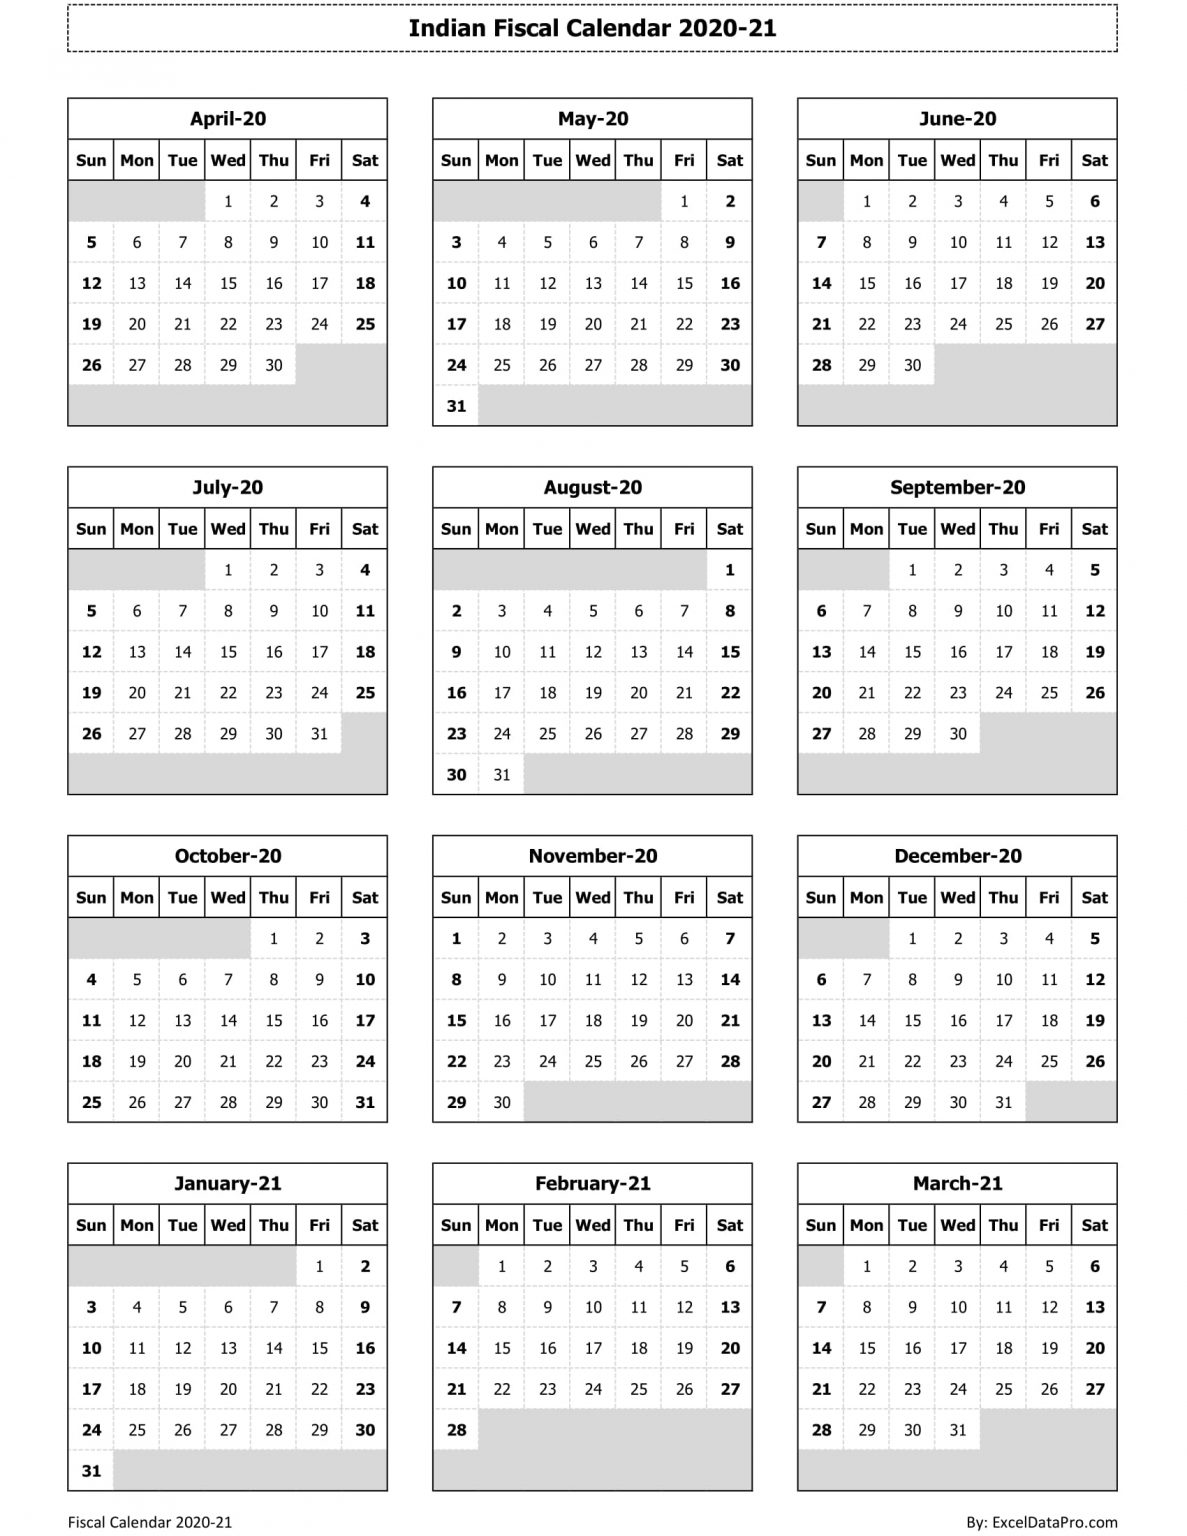 Download Indian Fiscal Calendar 2020-21 Excel Template - ExcelDataPro